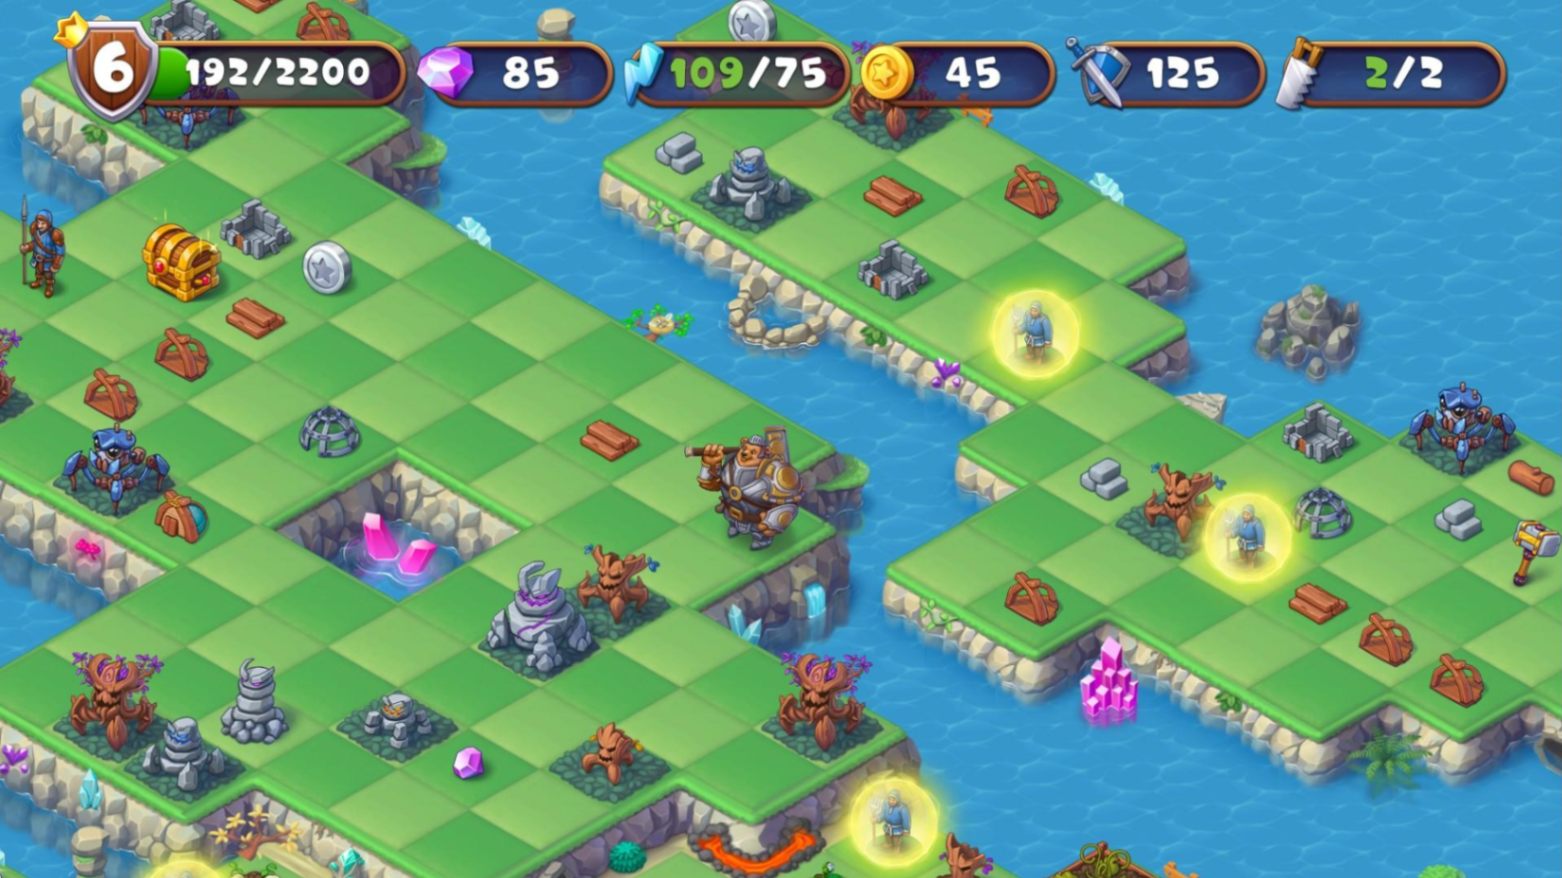 See How To Get Diamonds In Mergest Kingdom